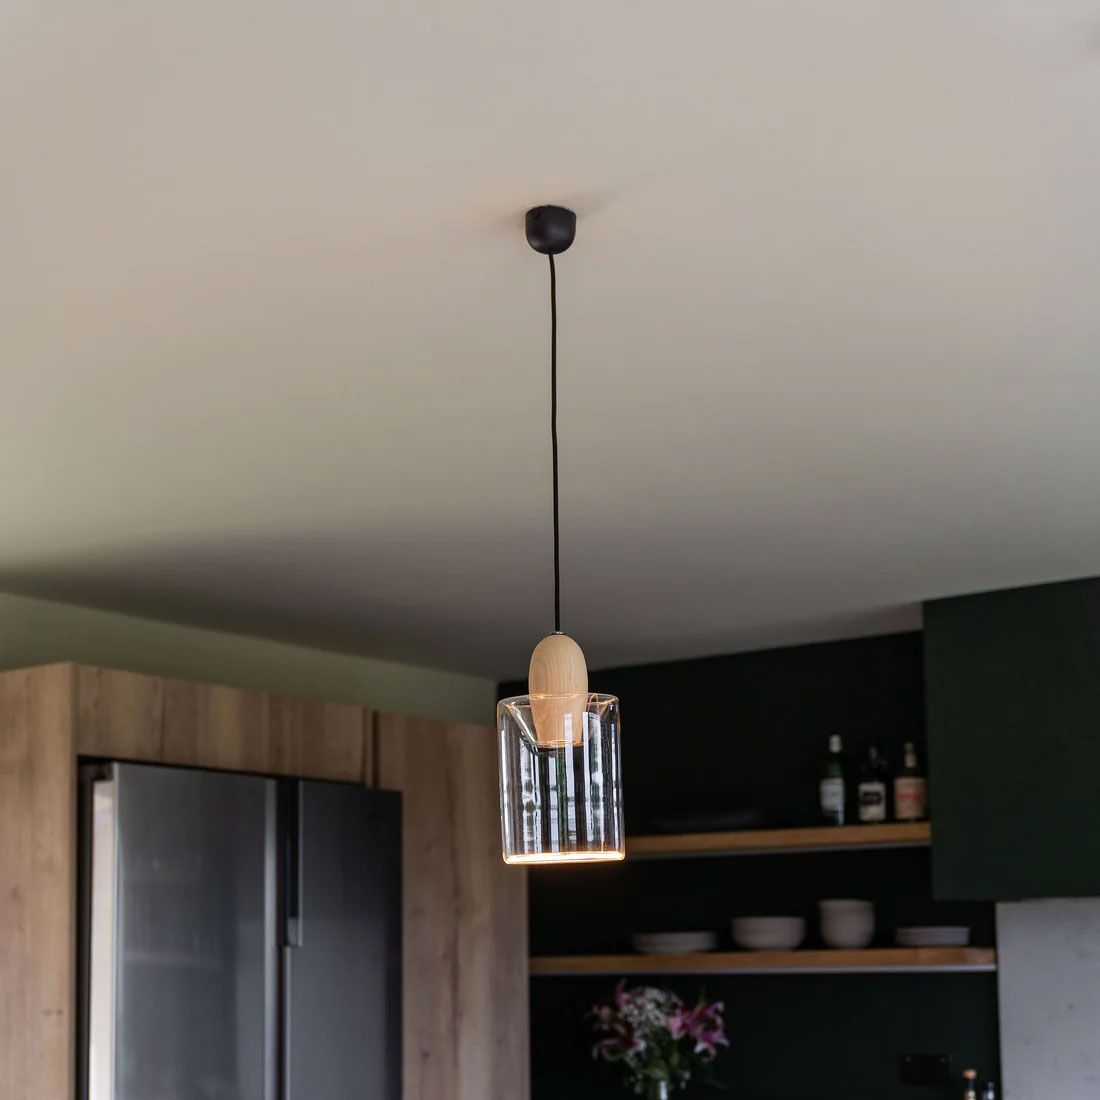 Glass pendant ceiling light bulb from Well Lit makes it quick and easy to fit in any home